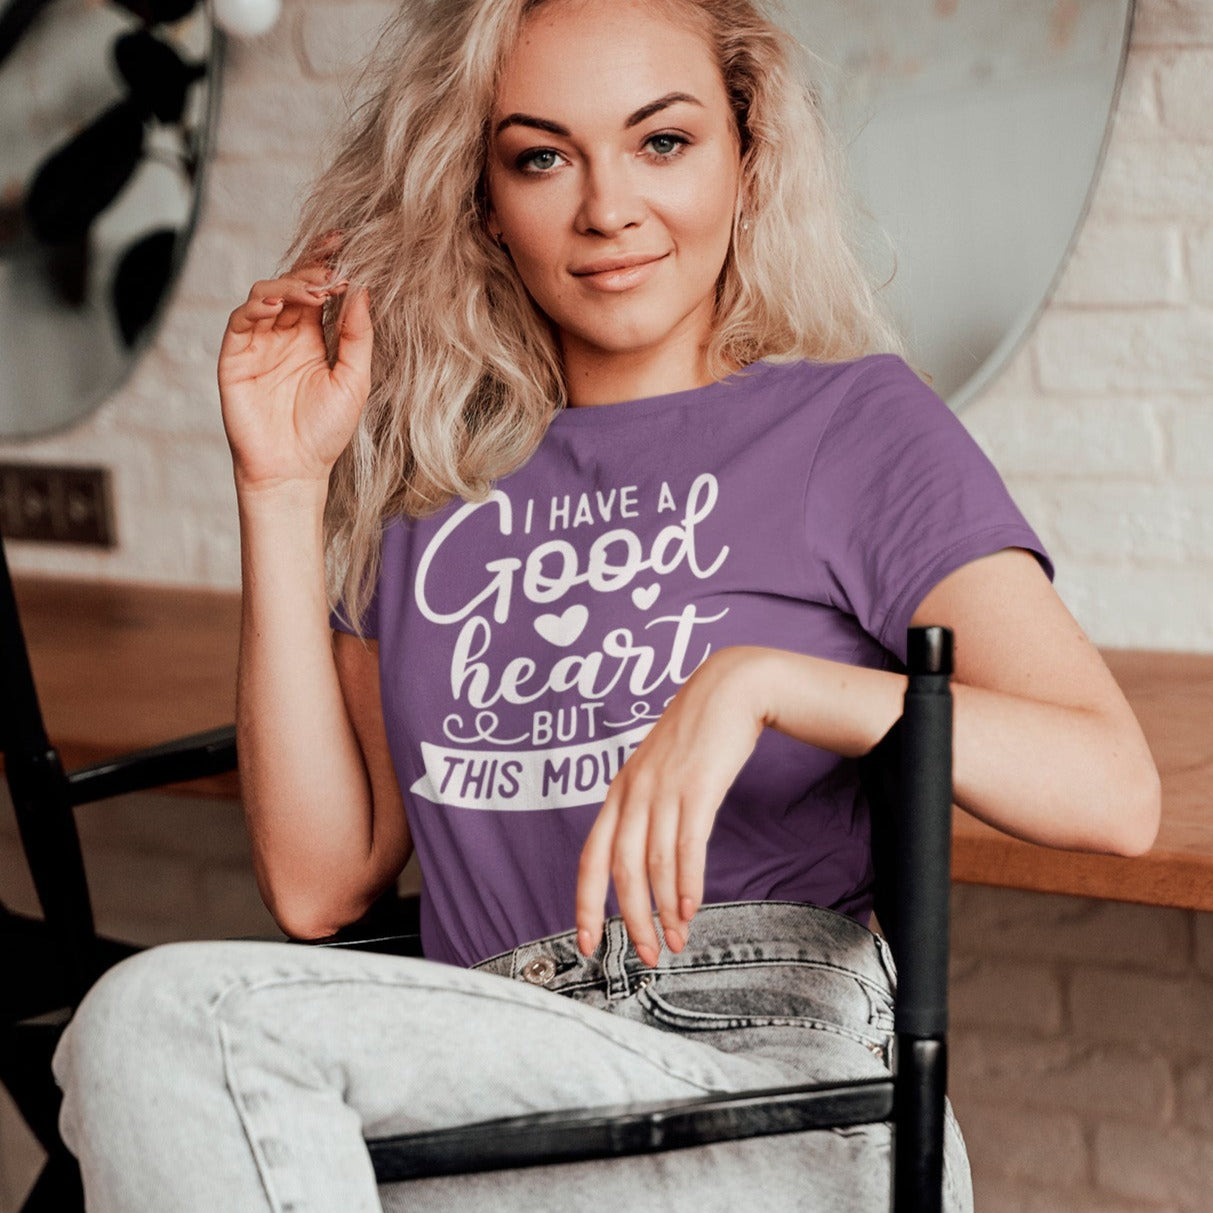 i-have-a-good-heart-but-this-mouth-team-purple-t-shirt-women-sarcastic-funny-mockup-of-a-woman-posing-on-a-chair